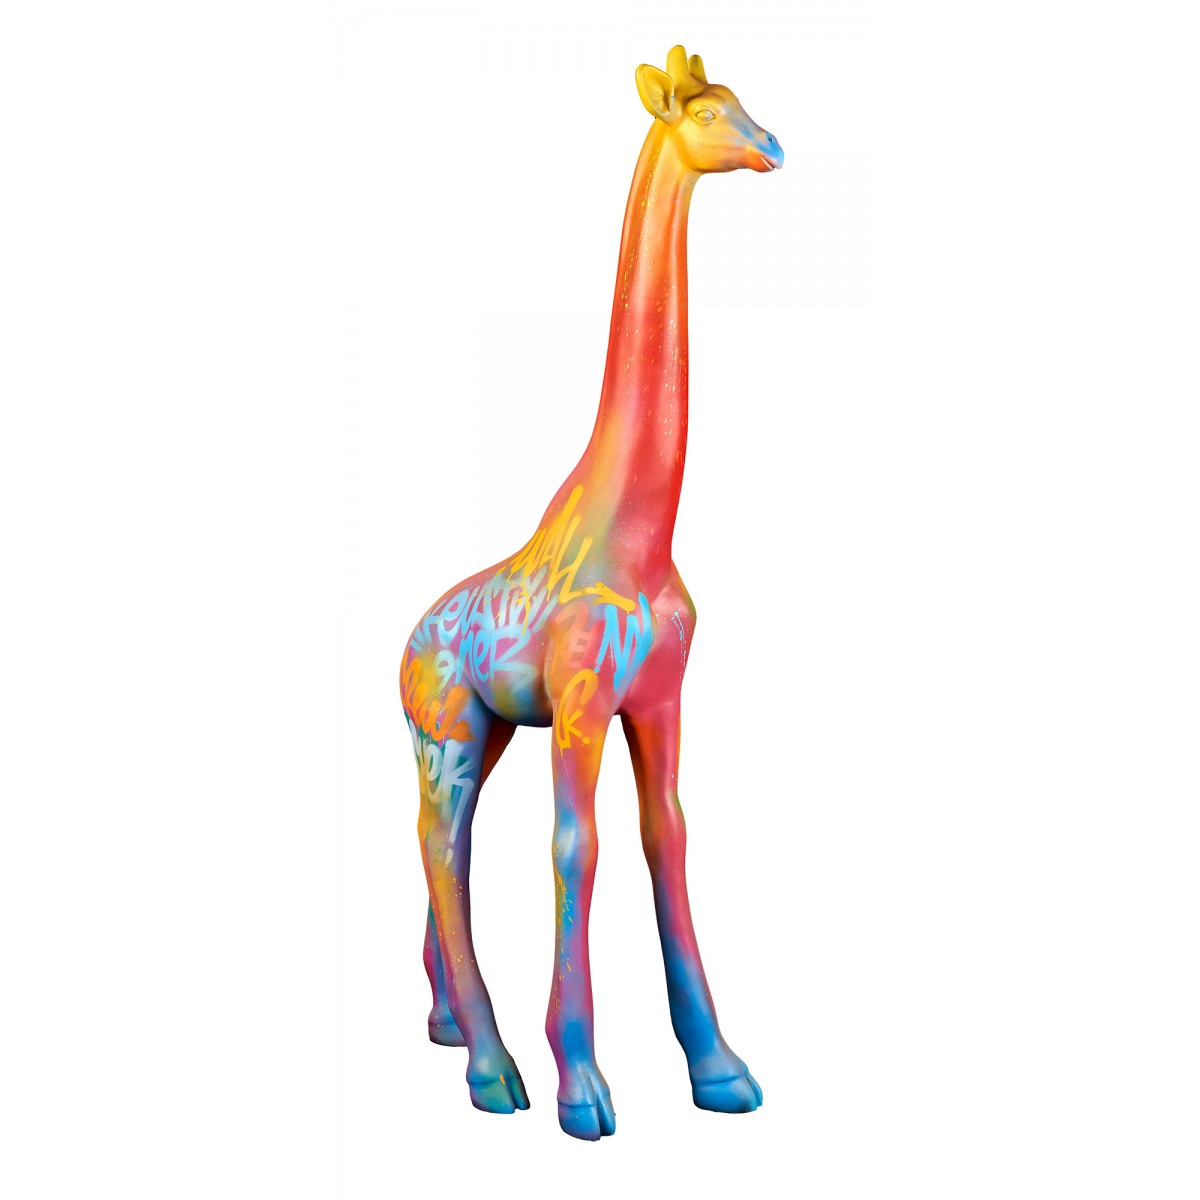 For your interior or exterior, opt for this GIRAFFE statue in quality | Strandtücher